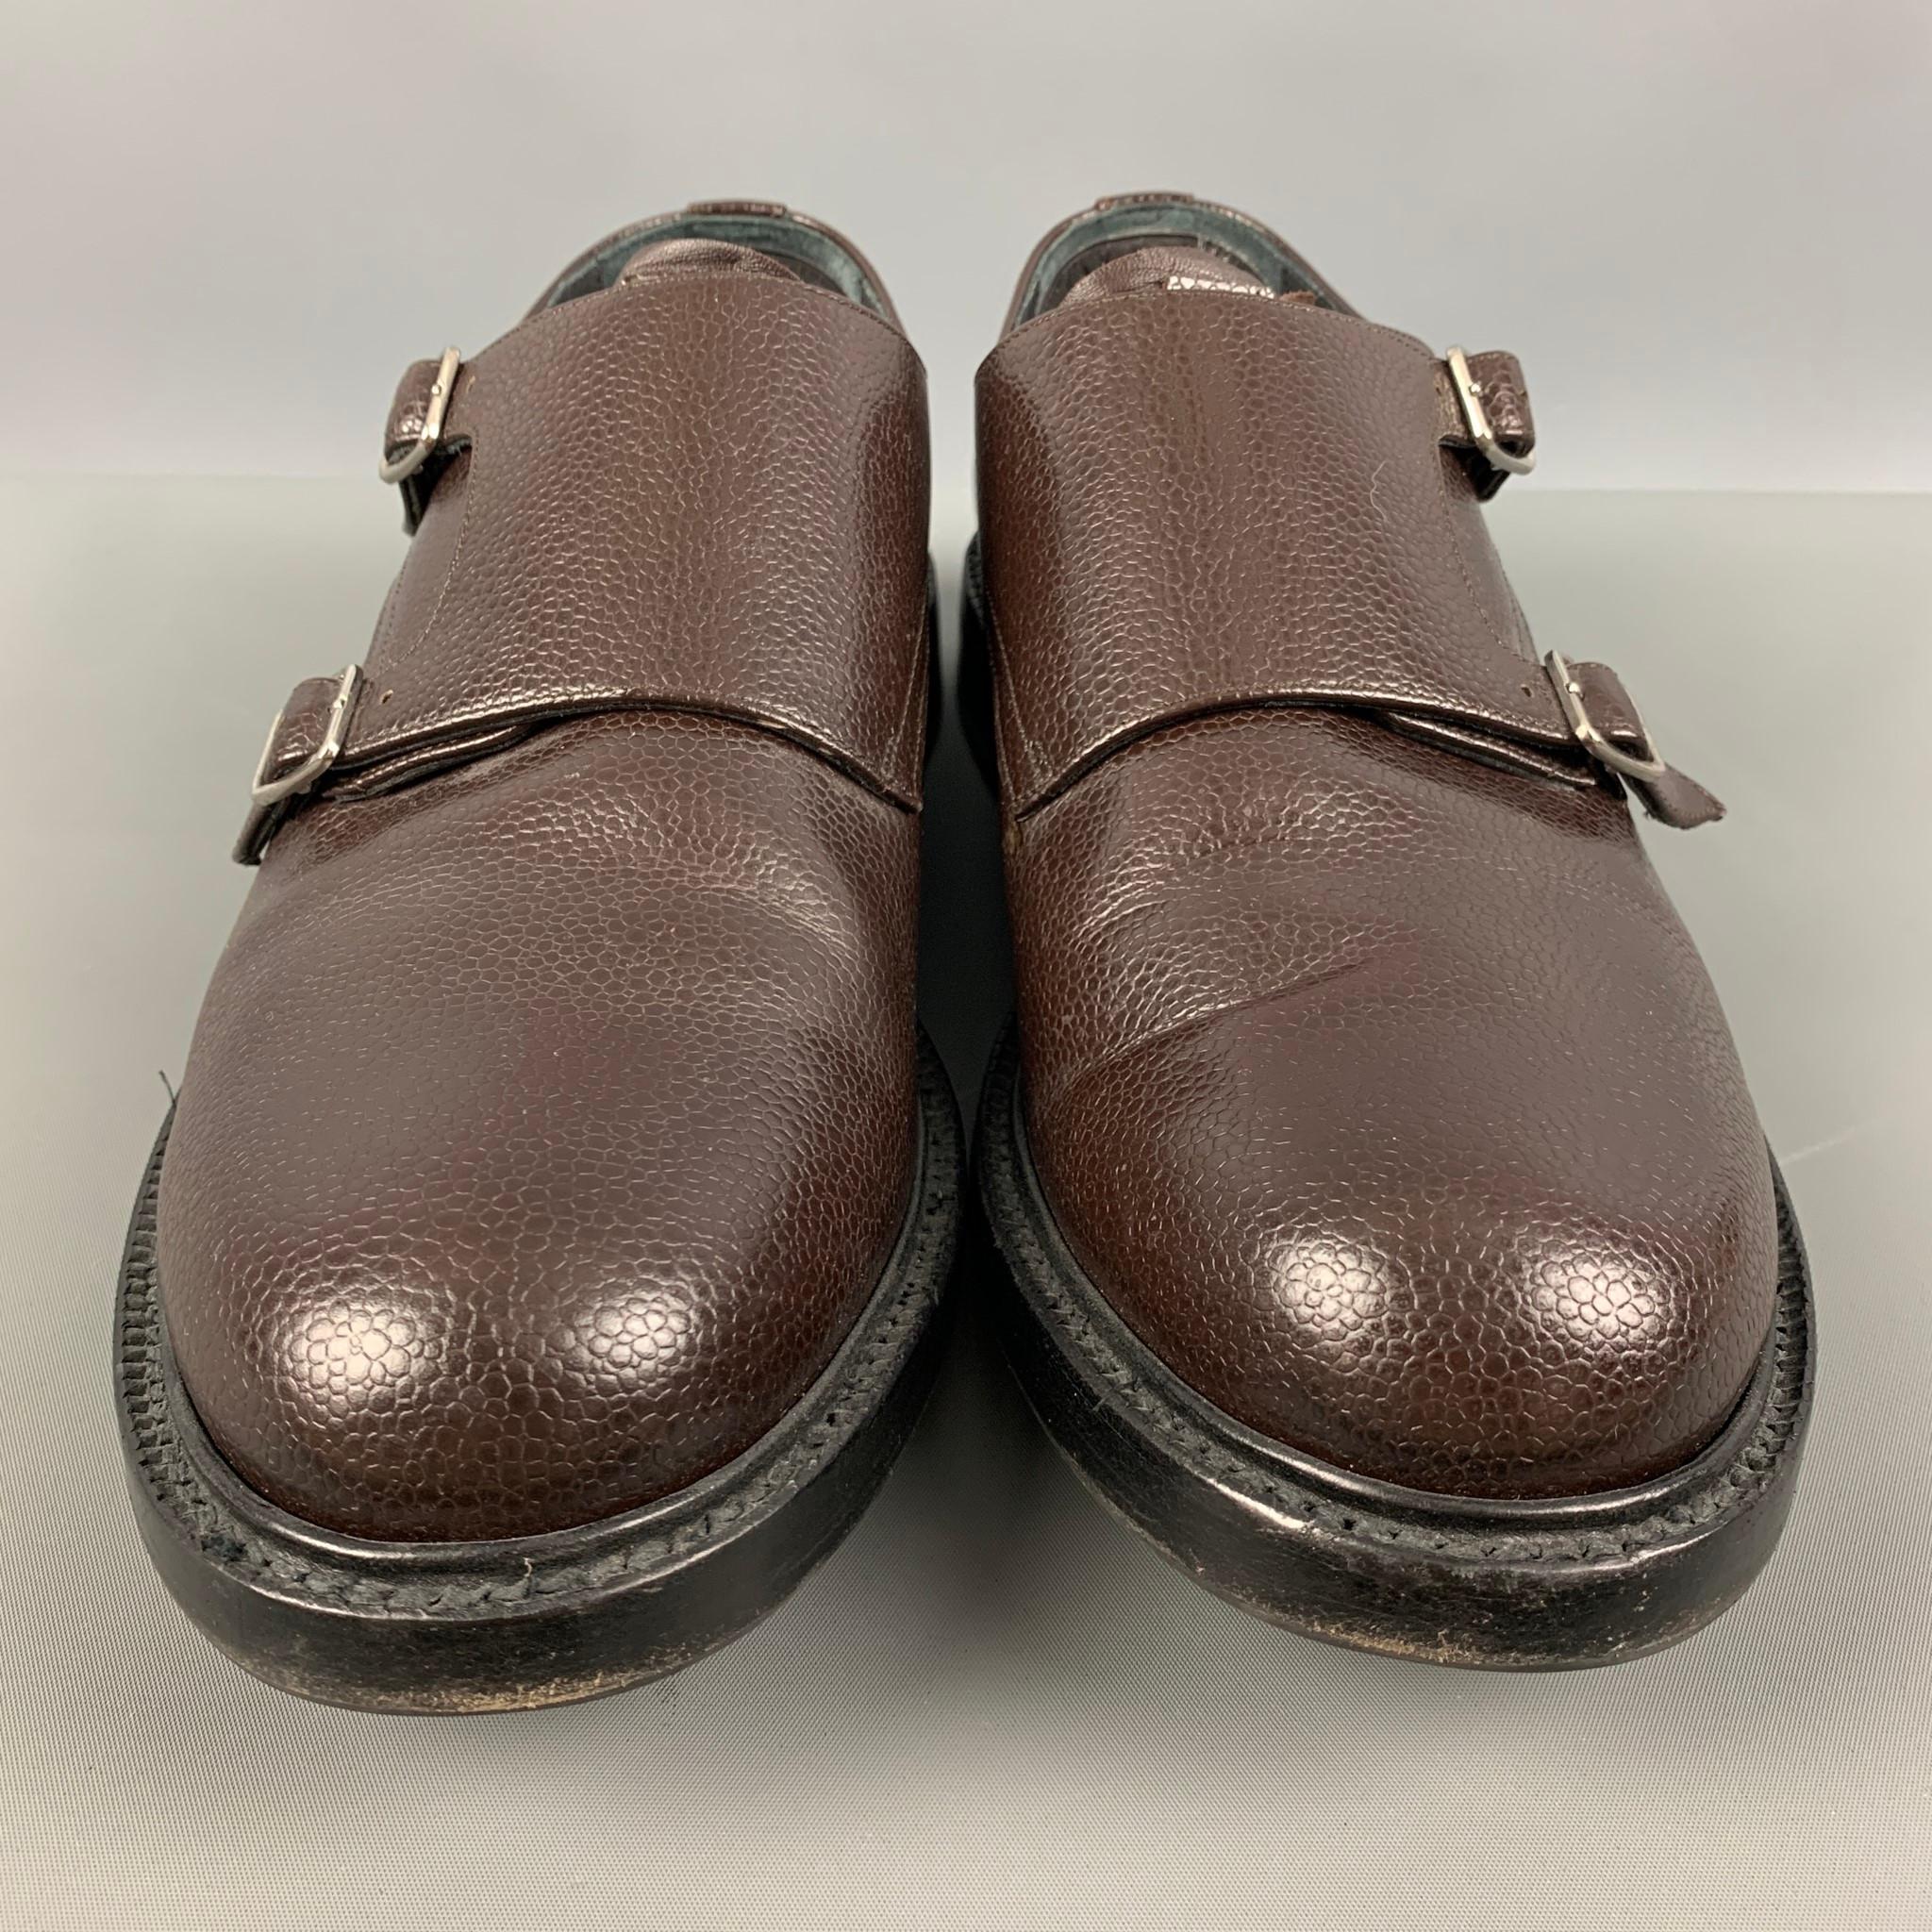 Men's CALVIN KLEIN 205W39NYC Size 10 Brown Solid Leather Double Monk Strap Loafers